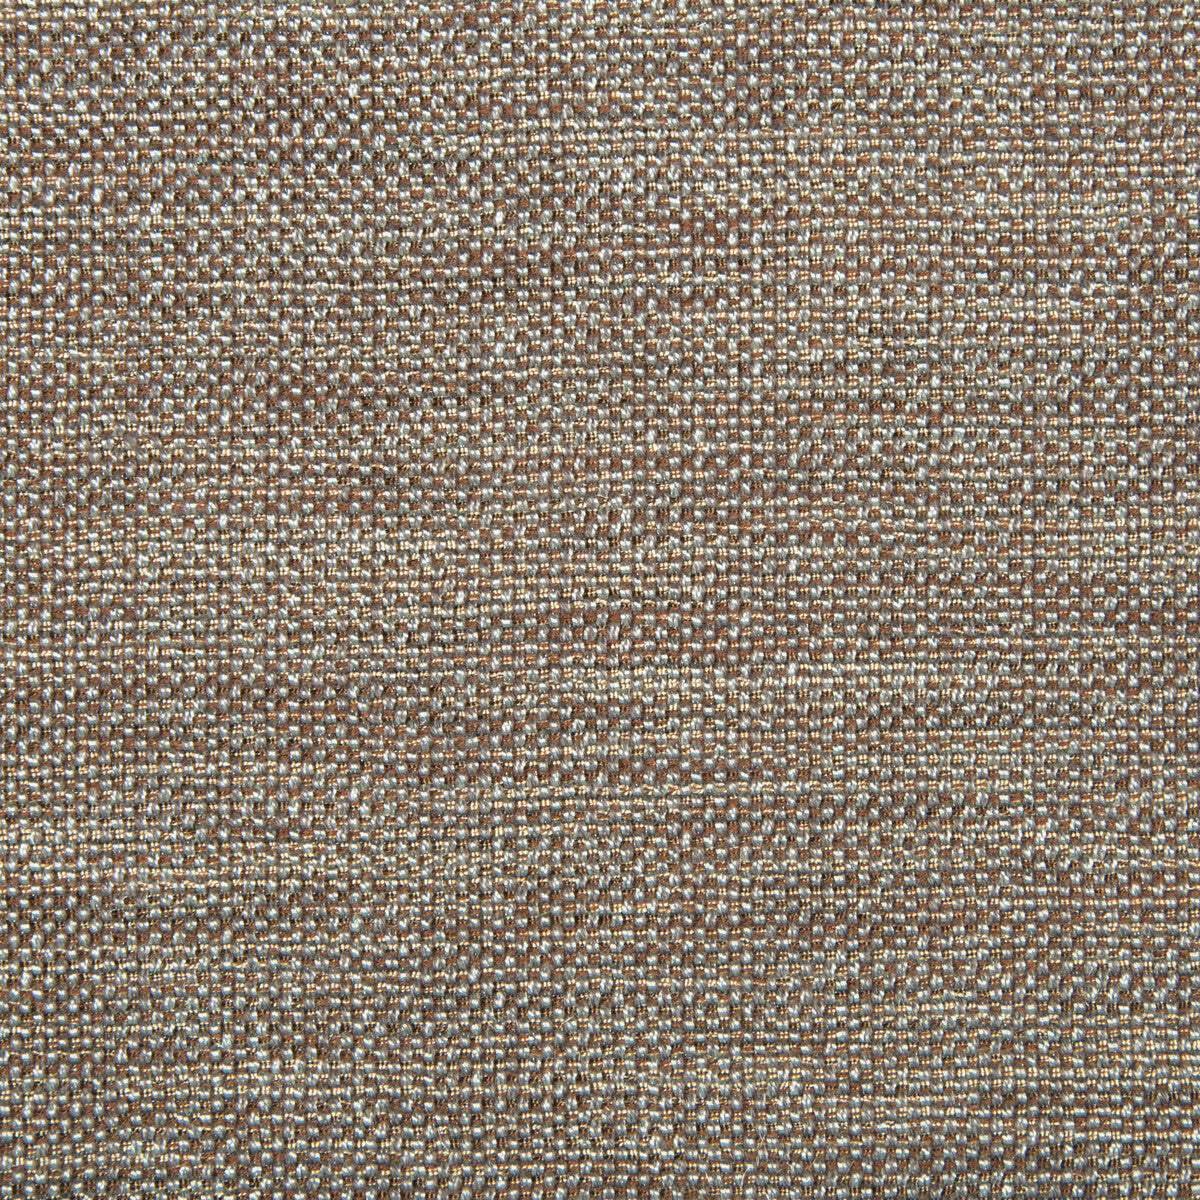 Kravet Contract fabric in 34926-611 color - pattern 34926.611.0 - by Kravet Contract